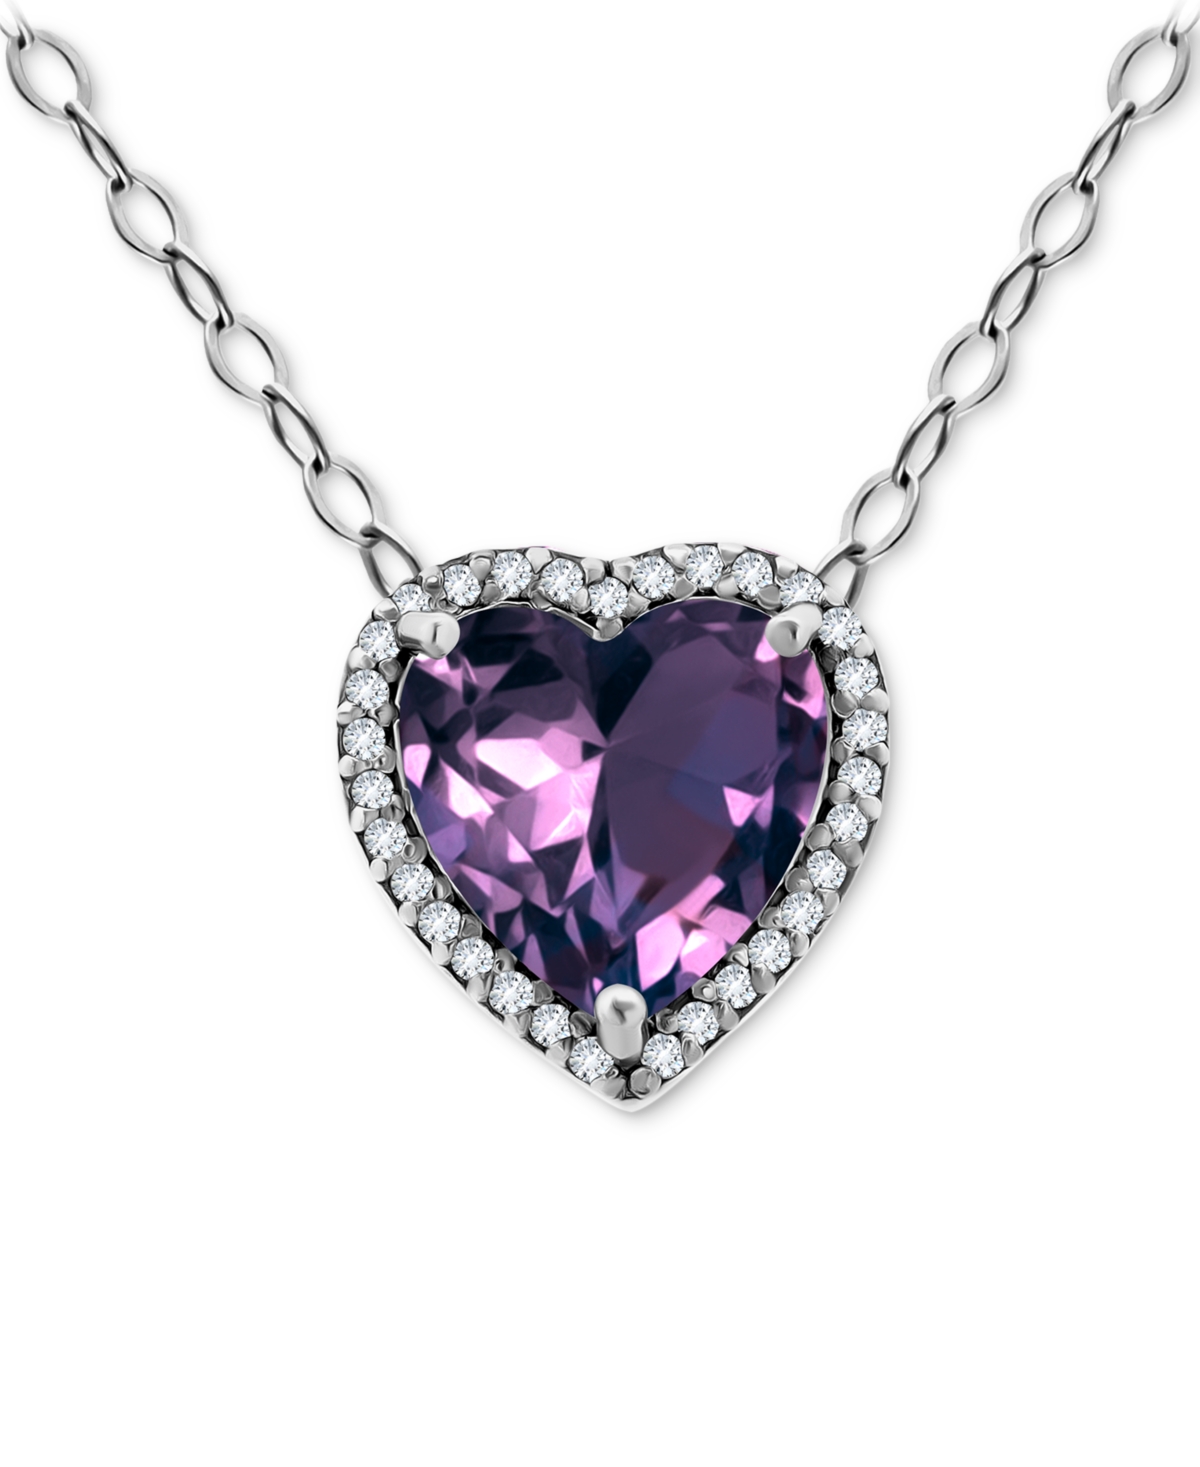 Giani Bernini Cubic Zirconia Heart Halo Pendant Necklace In Sterling Silver, 16" + 2" Extender, Created For Macy's In Purple